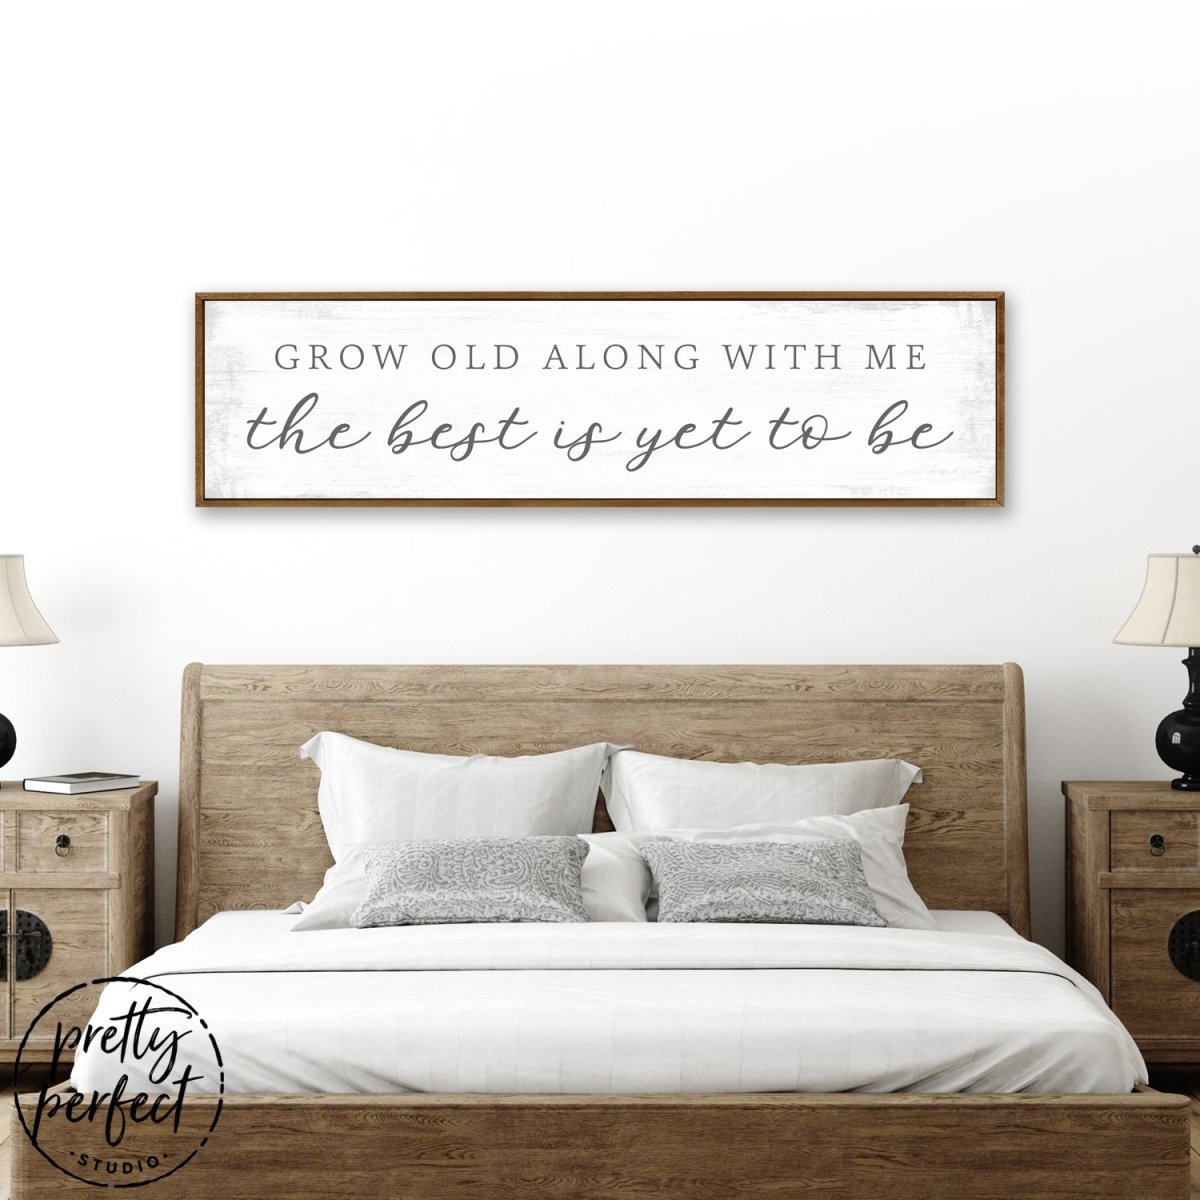 Grow Old Along With Me The Best is Yet to Be Sign Above Bed - Pretty Perfect Studio